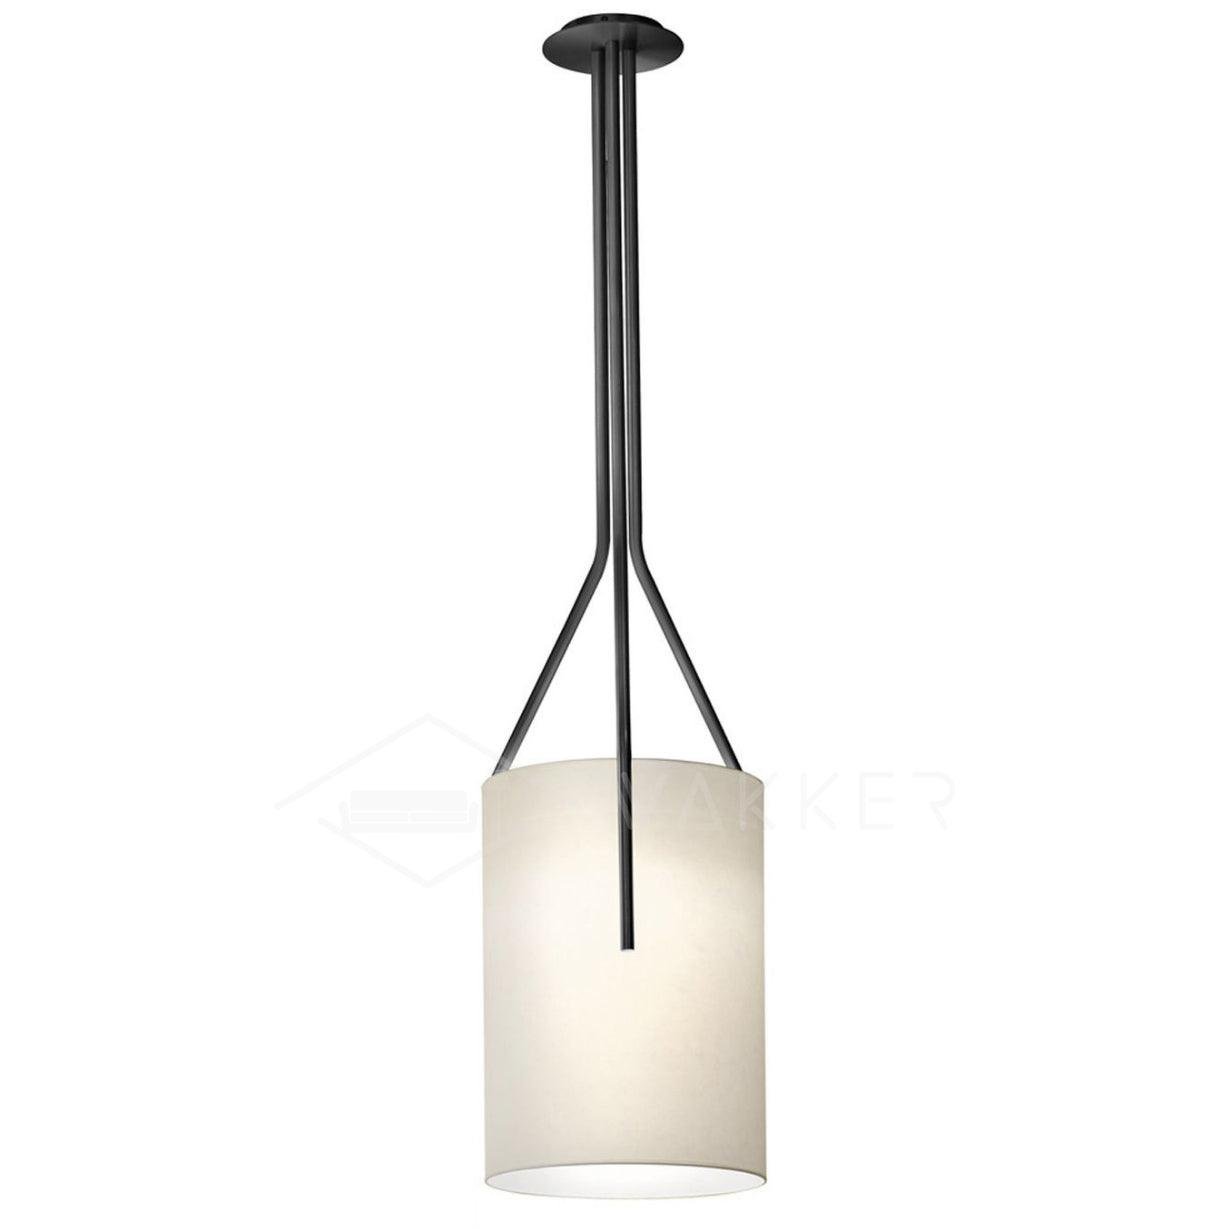 Black Arborescence Chandelier with Diameter of 11.8" and Height of 55.1" (30cm x 140cm)